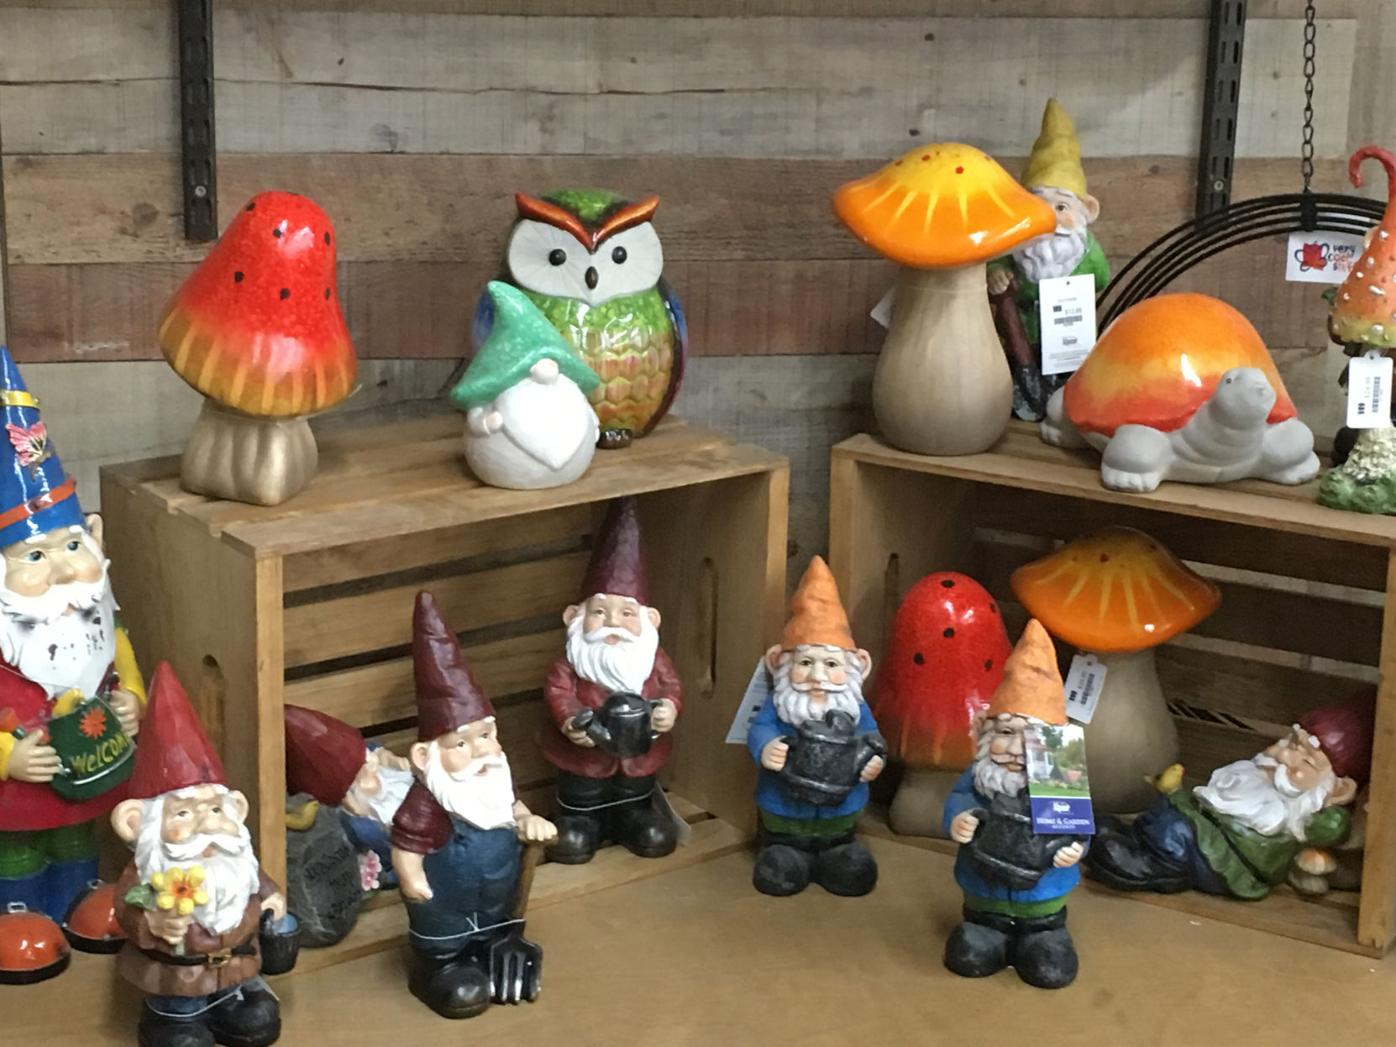 Garden gnomes: Cultural story behind lawn ornament figurines